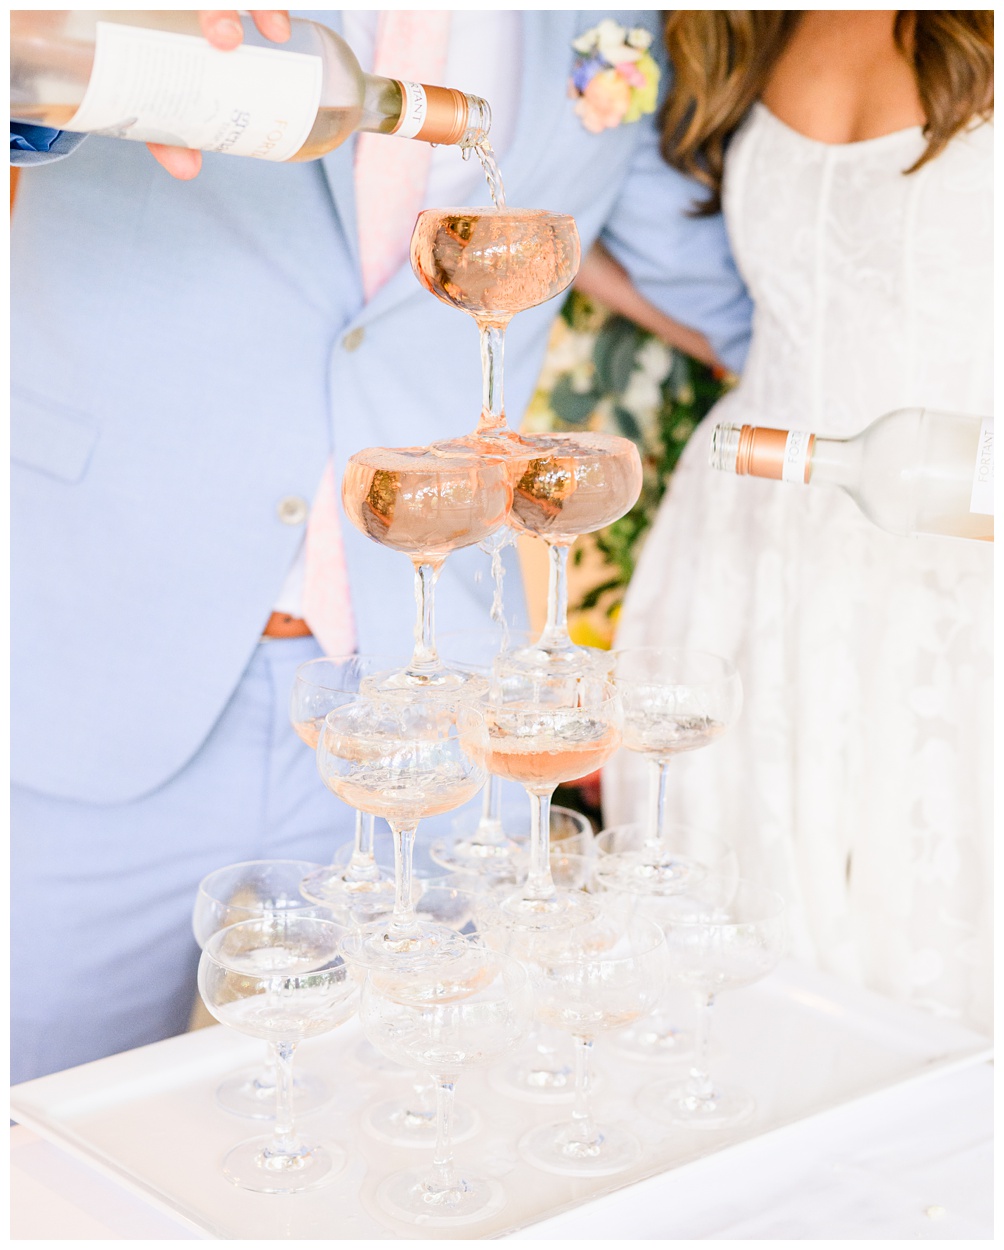 Shady Villa Hotel Wedding Photographer shares Rose Tower pour by bride and groom at Stagecoach Restaurant Brunch reception in Salado Texas